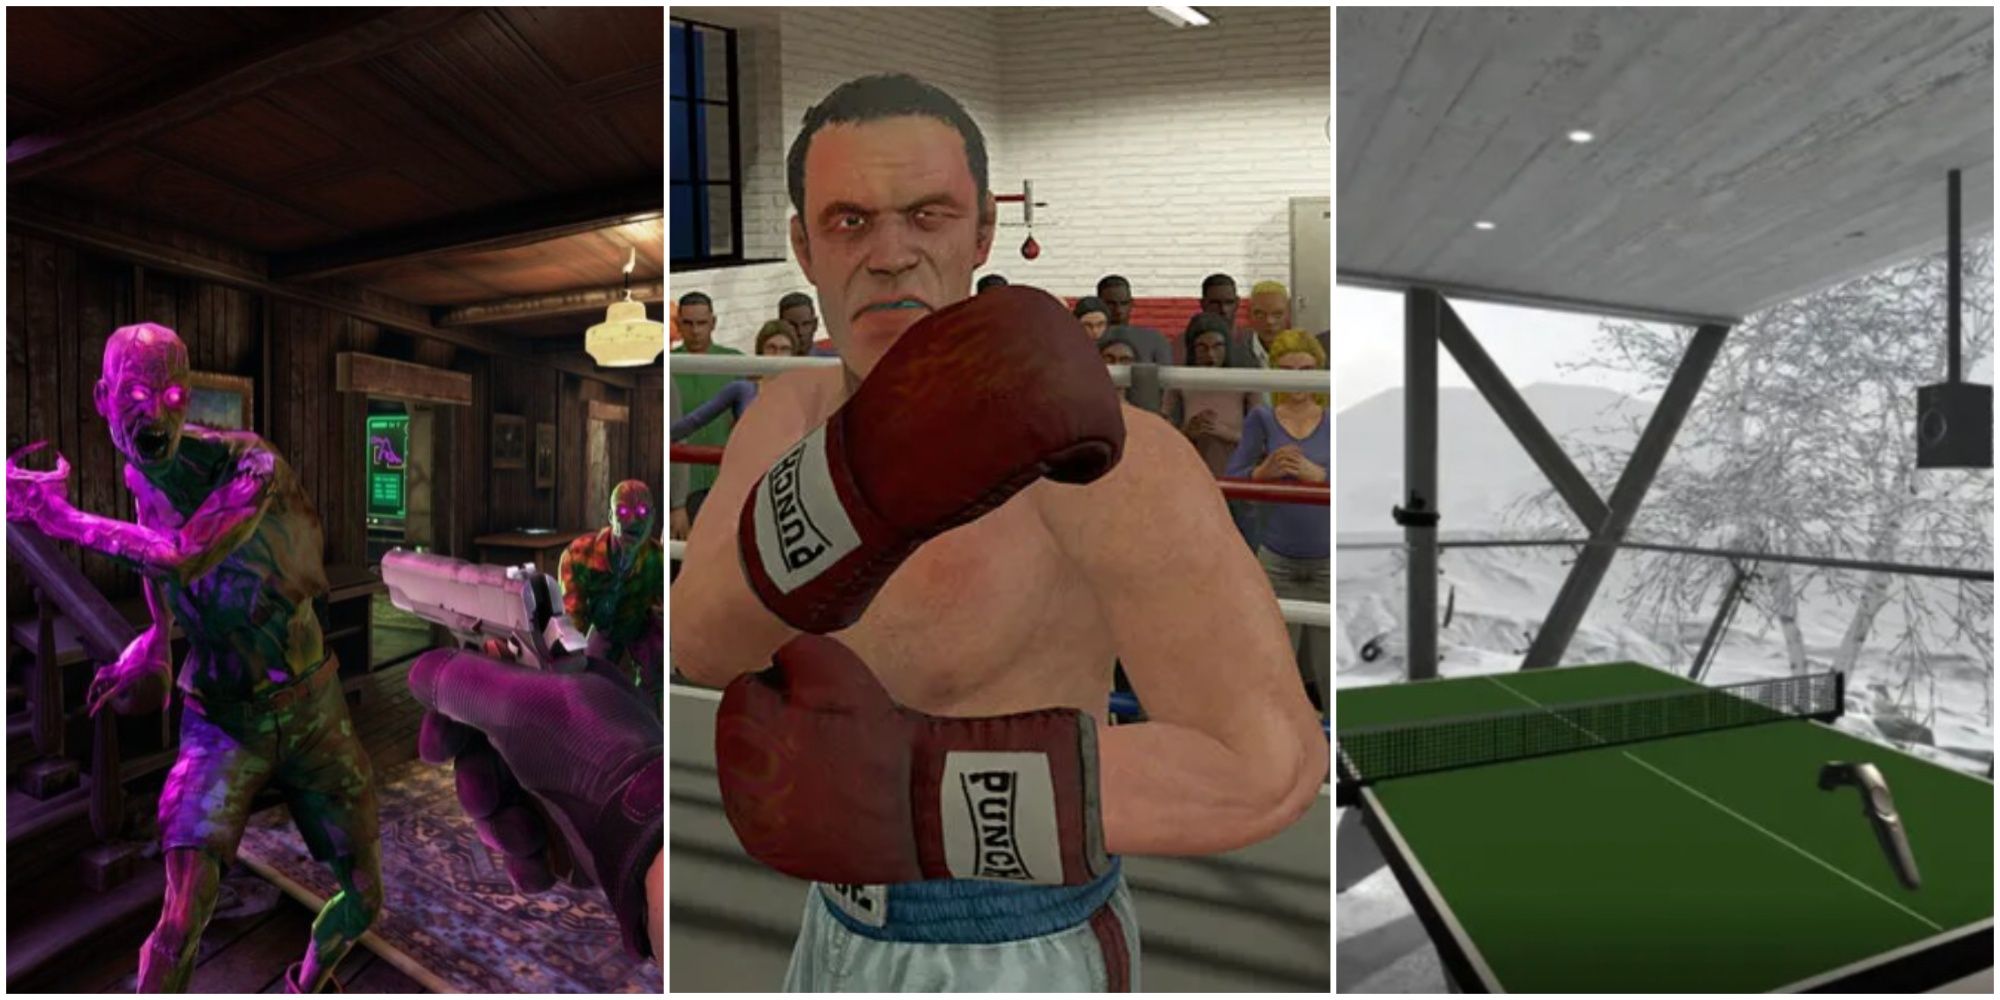 Zombies, boxing man and table tennis